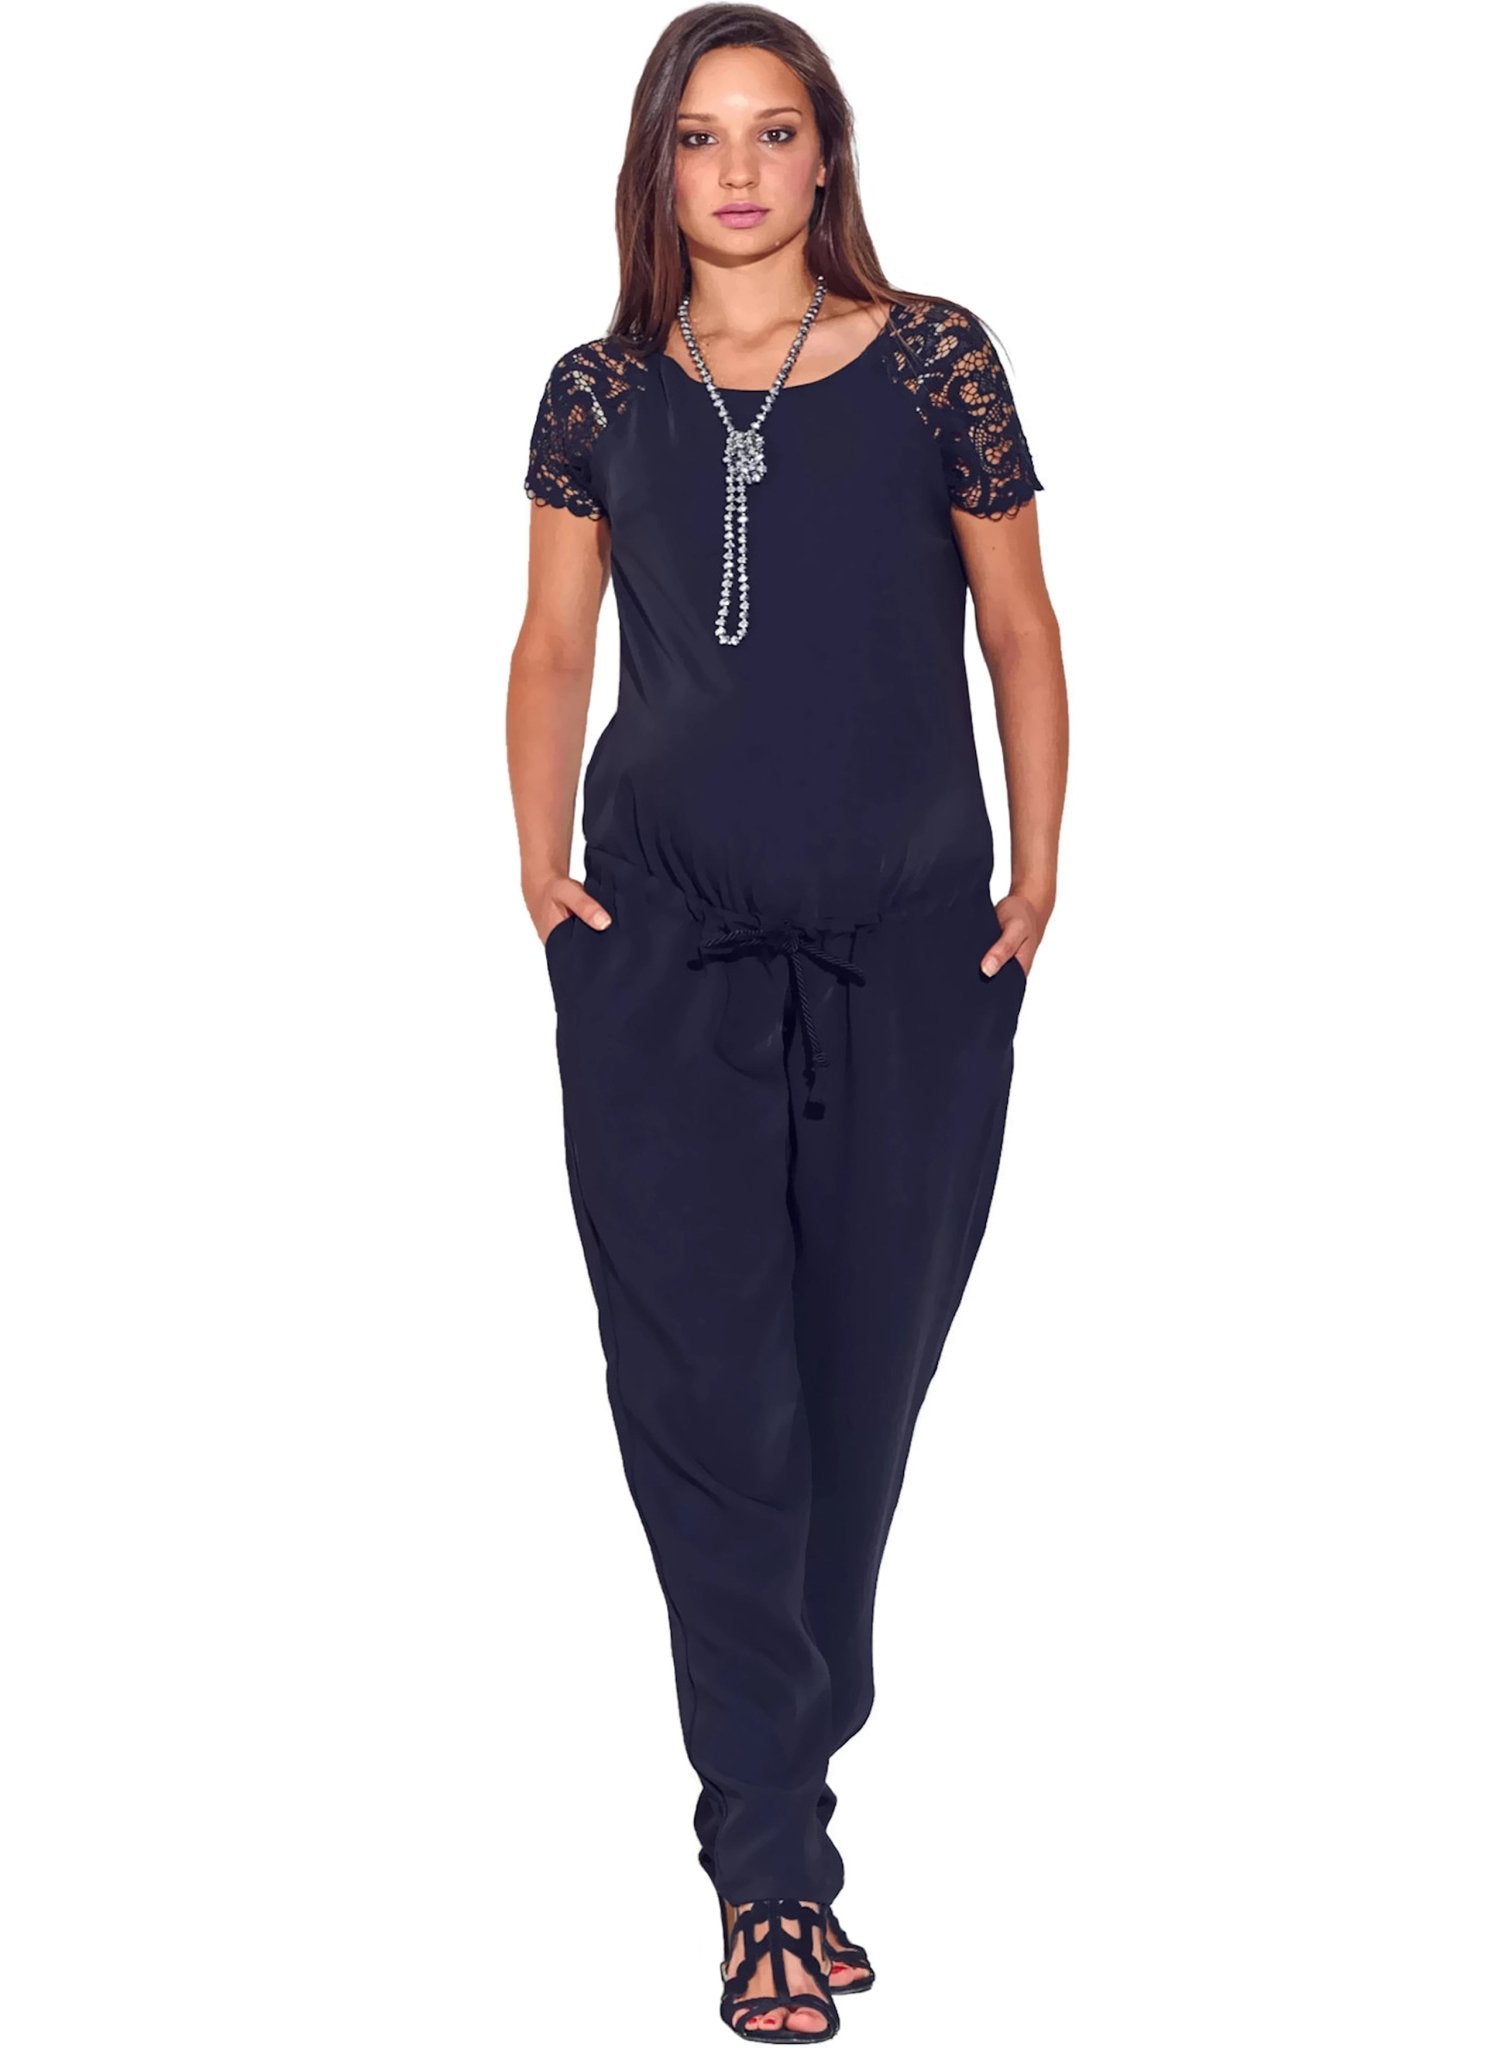 Lace Sleeve Maternity Jumpsuit - Mums and Bumps